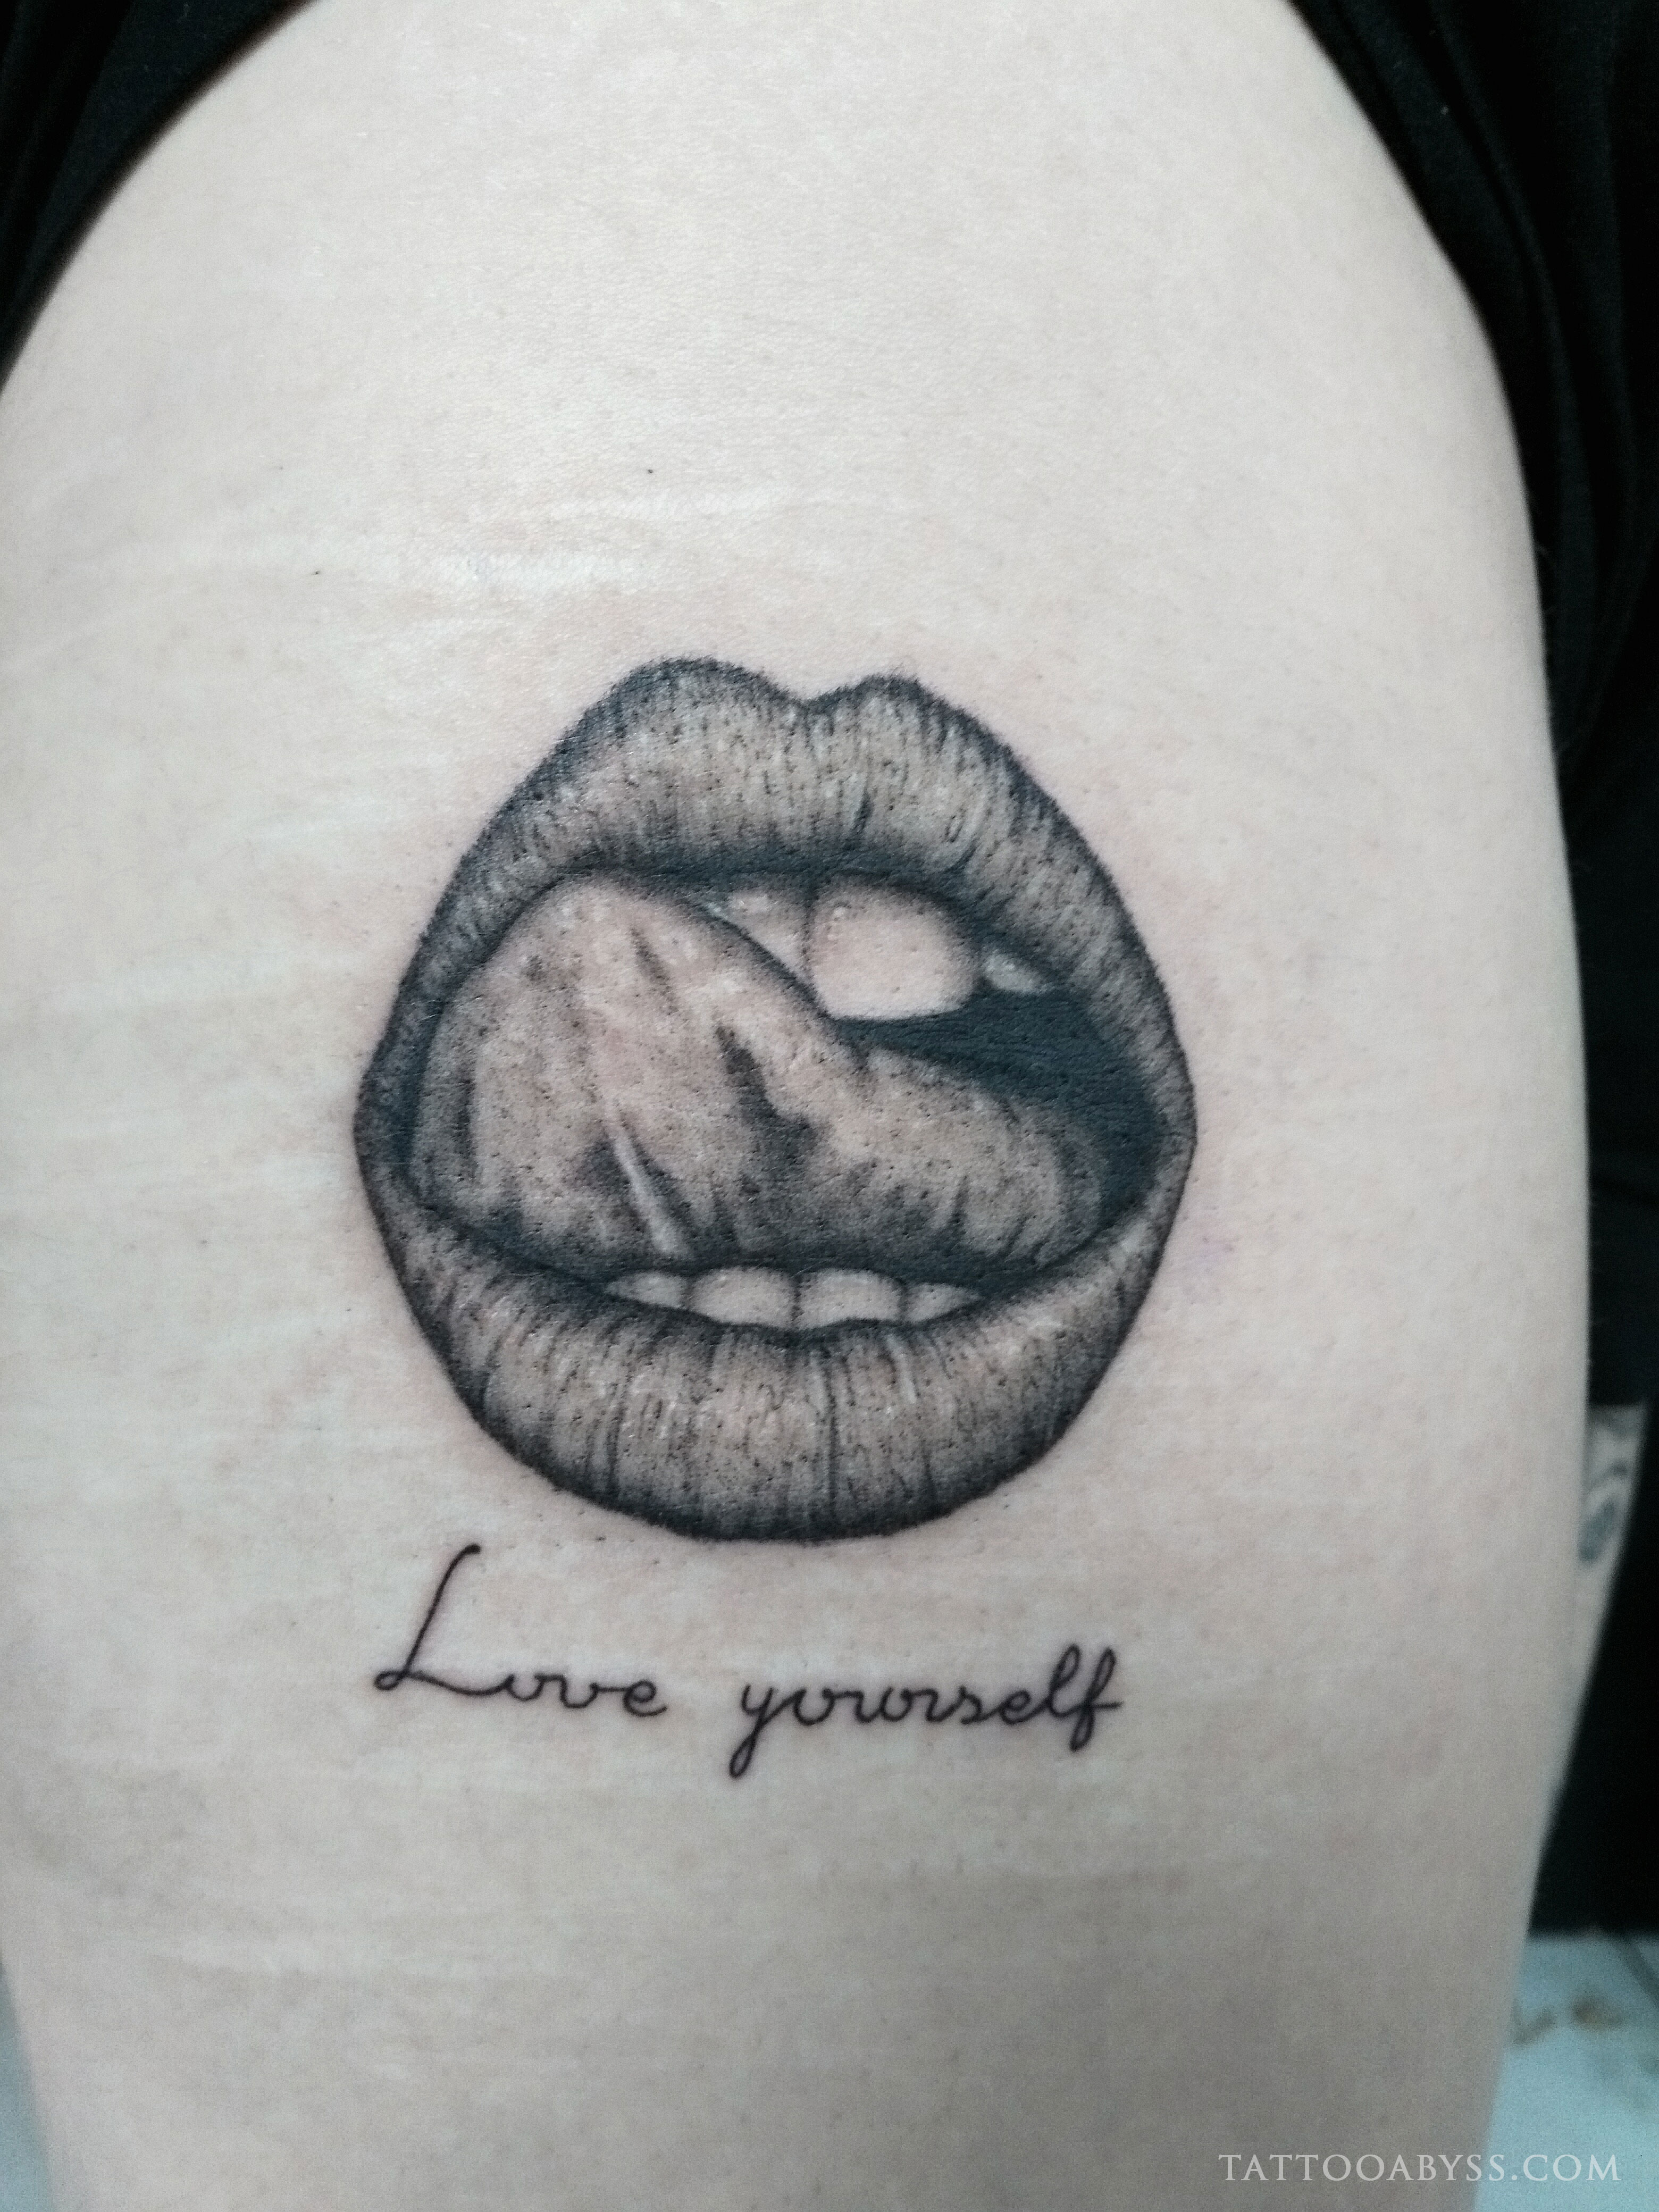 love-yourself-camille-tattoo-abyss